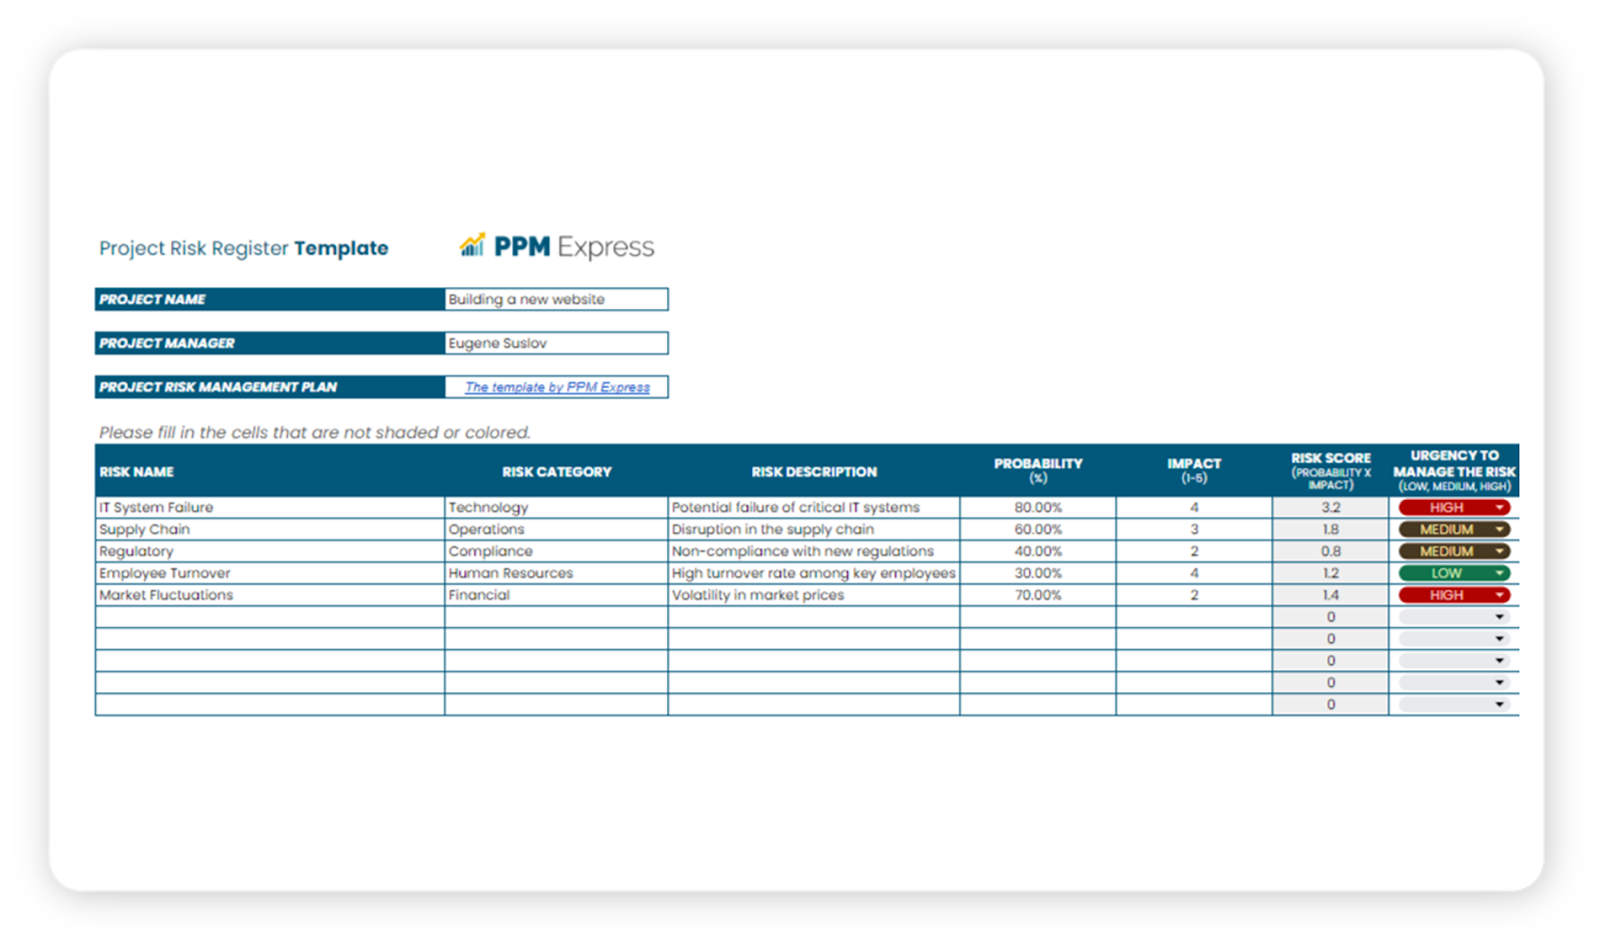 Project risk register template download for free by PPM Express